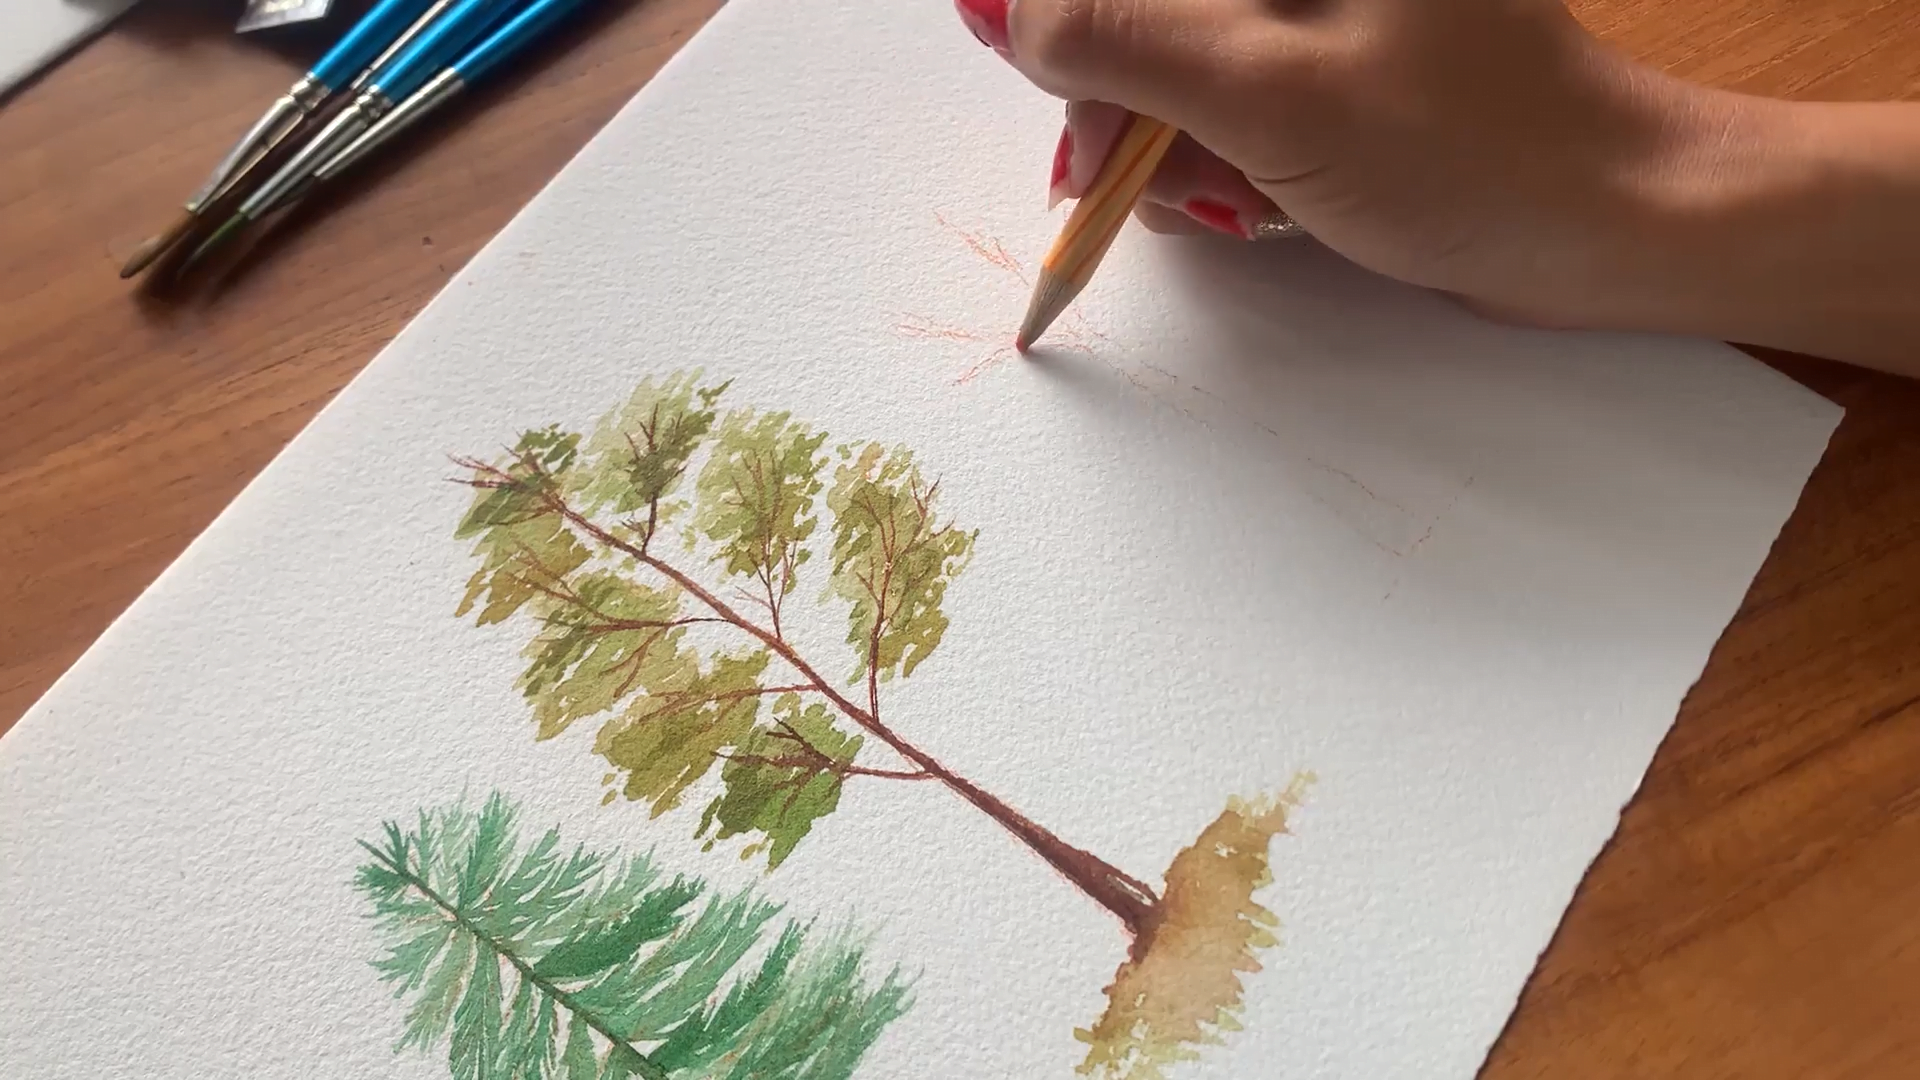 Sketch The Teak Tree Trunk And Branches